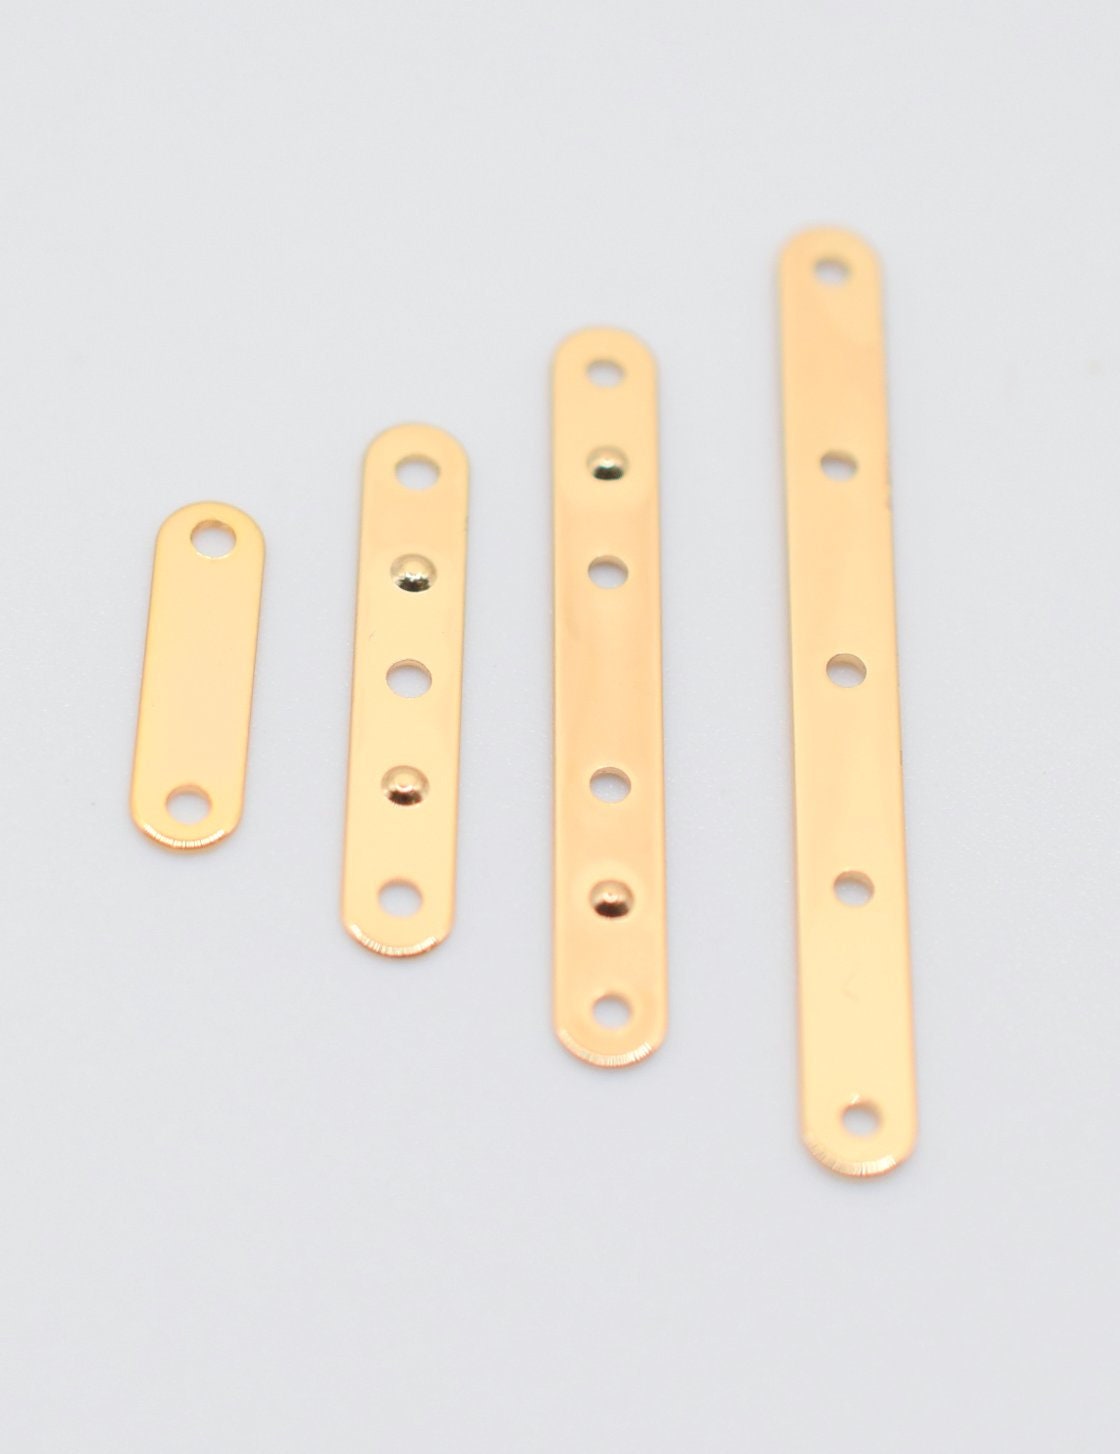 18K Gold Filled Spacer Bars - Multi-Line Jewelry Connectors for Layered Creations BeadsFindingDepot